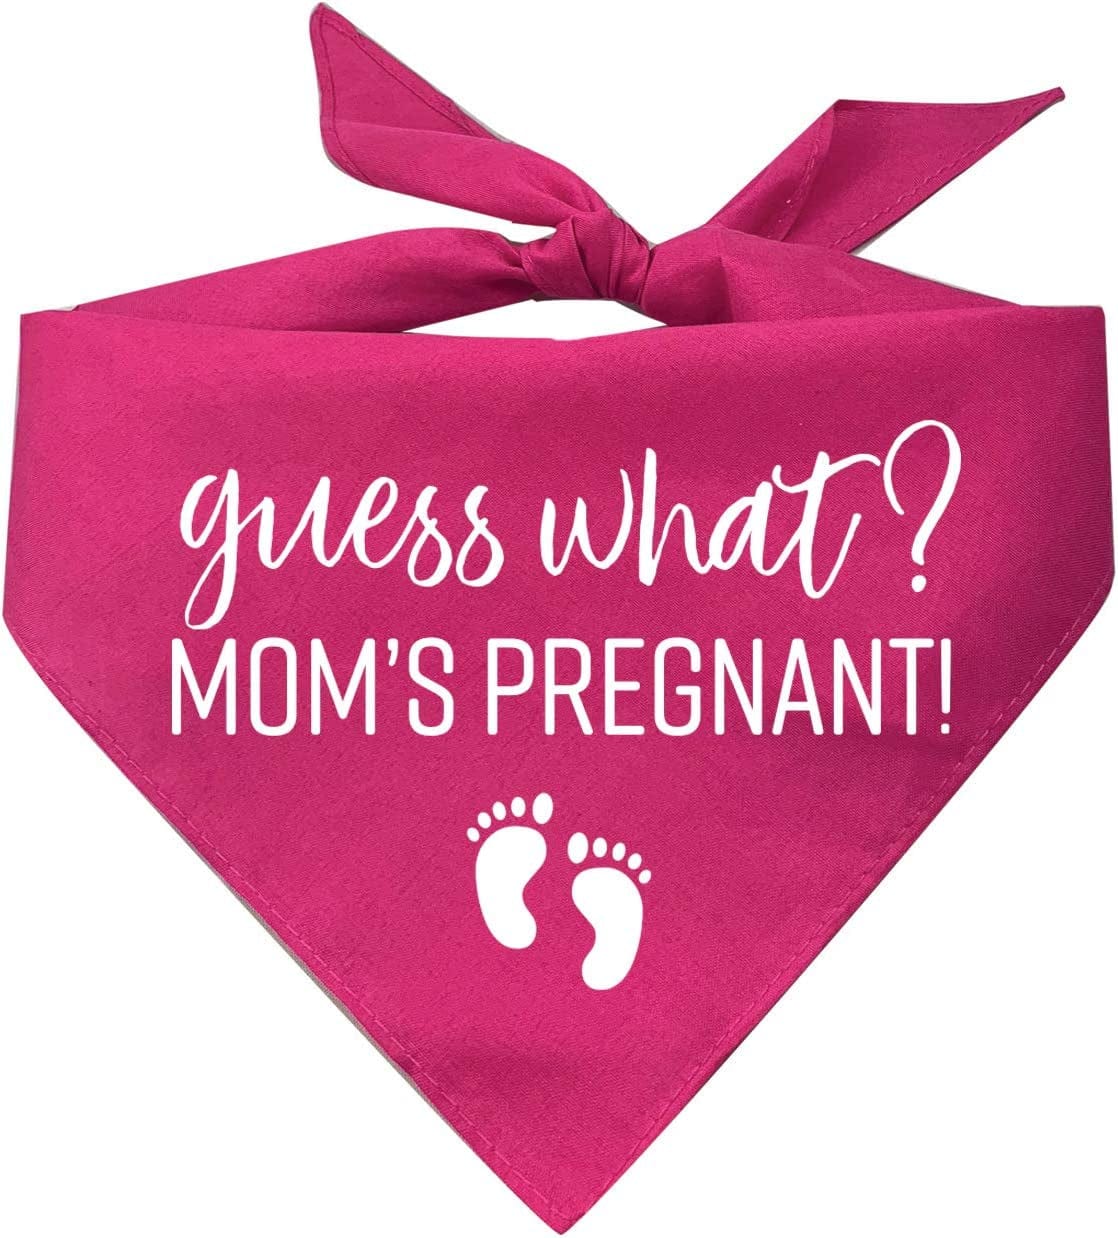 Guess What? Moms Pregnant Printed Dog Bandana (Assorted Colors)